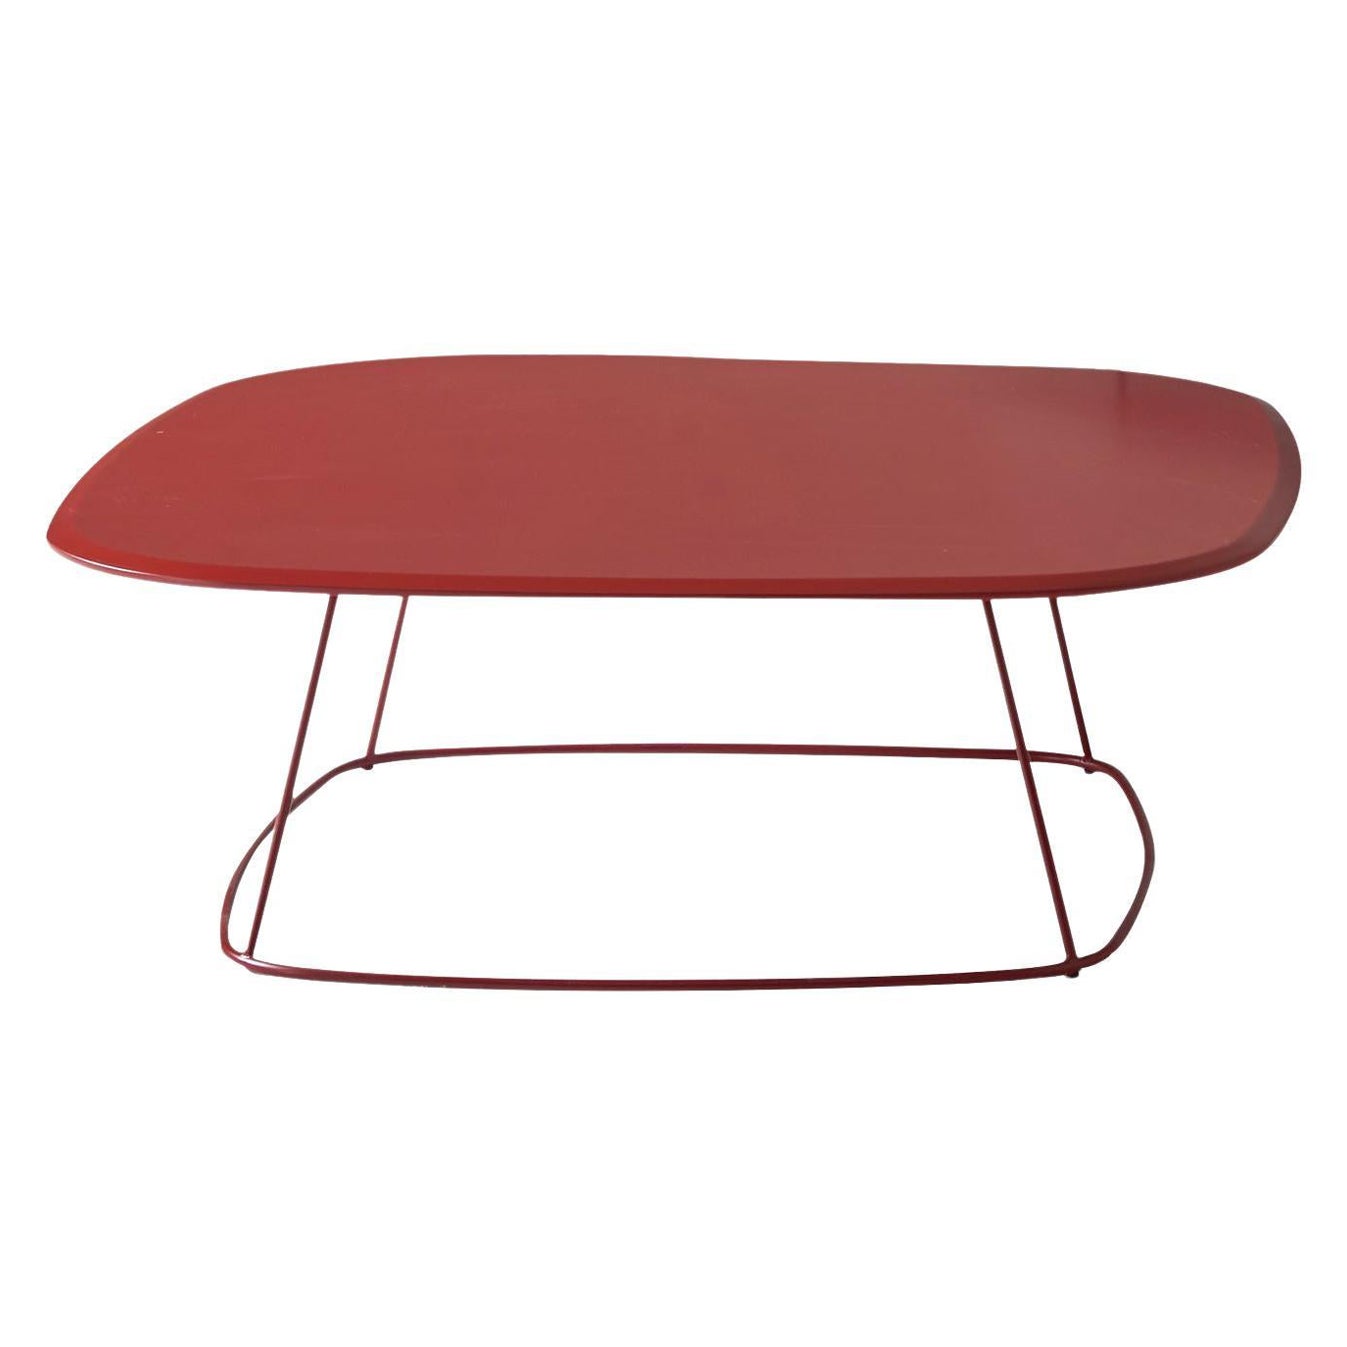 Freestyle Red Coffee Table by Angeletti Ruzza